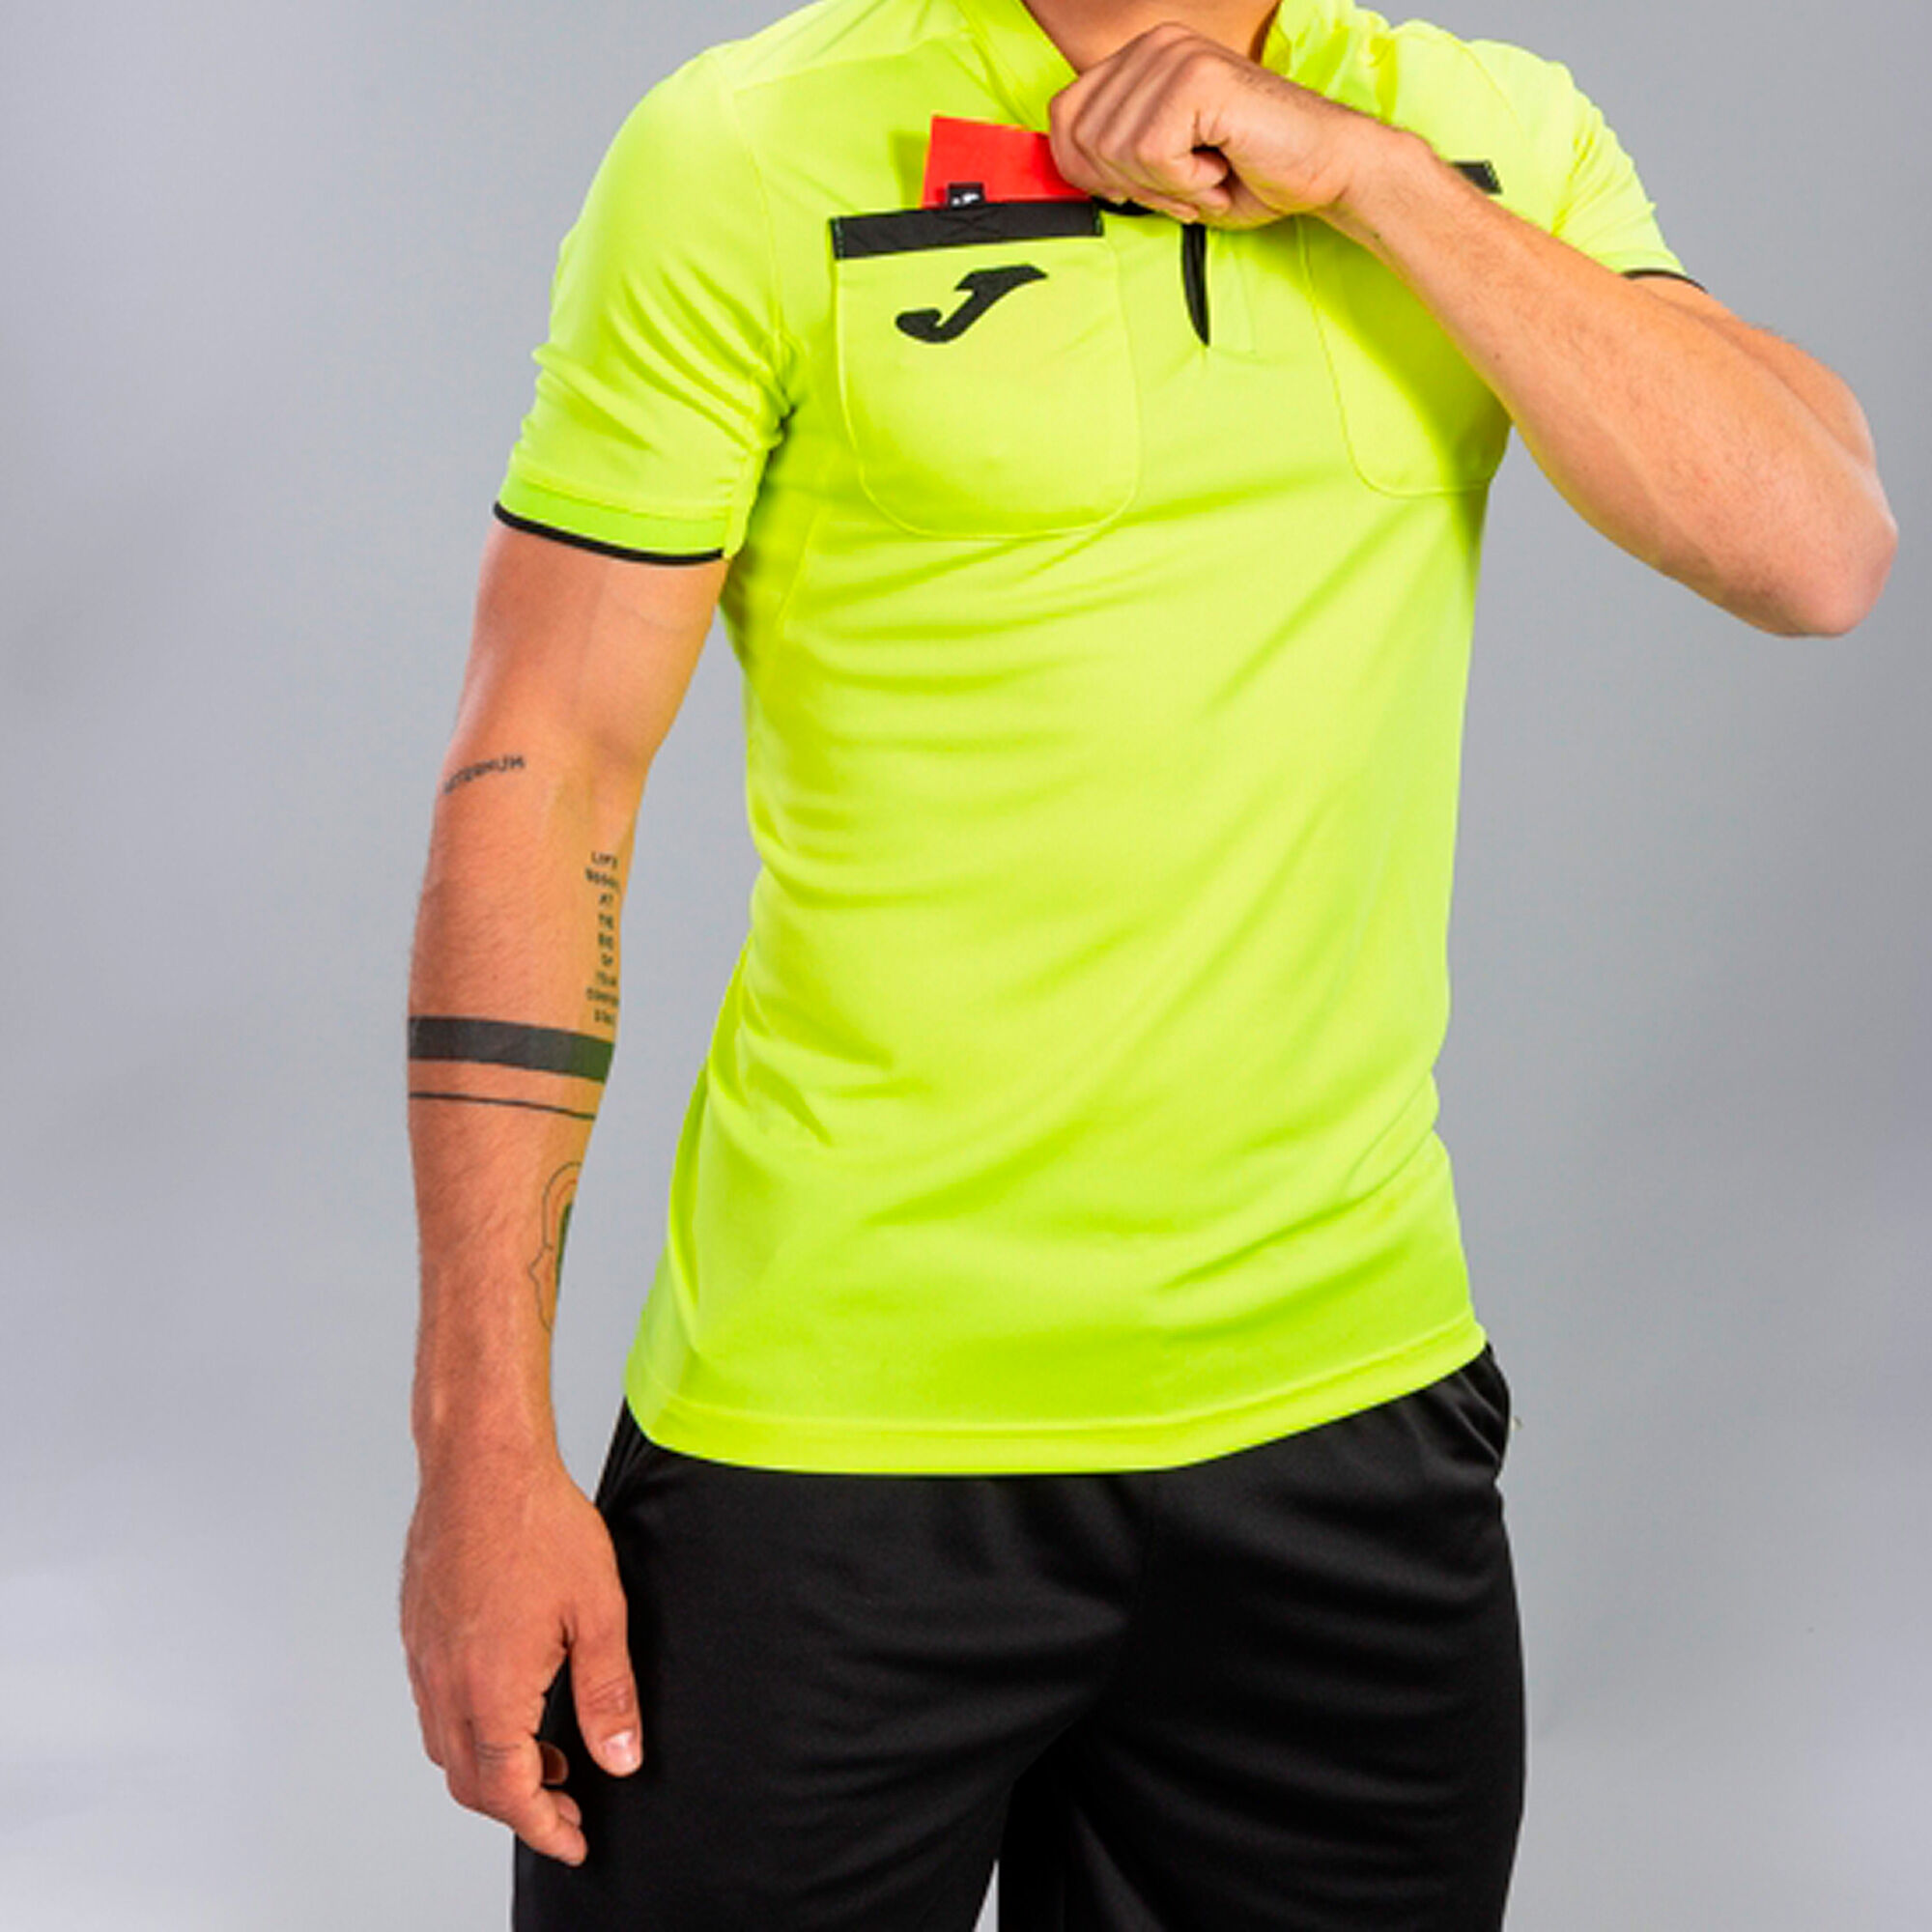 Maillot manches courtes homme Referee jaune fluo